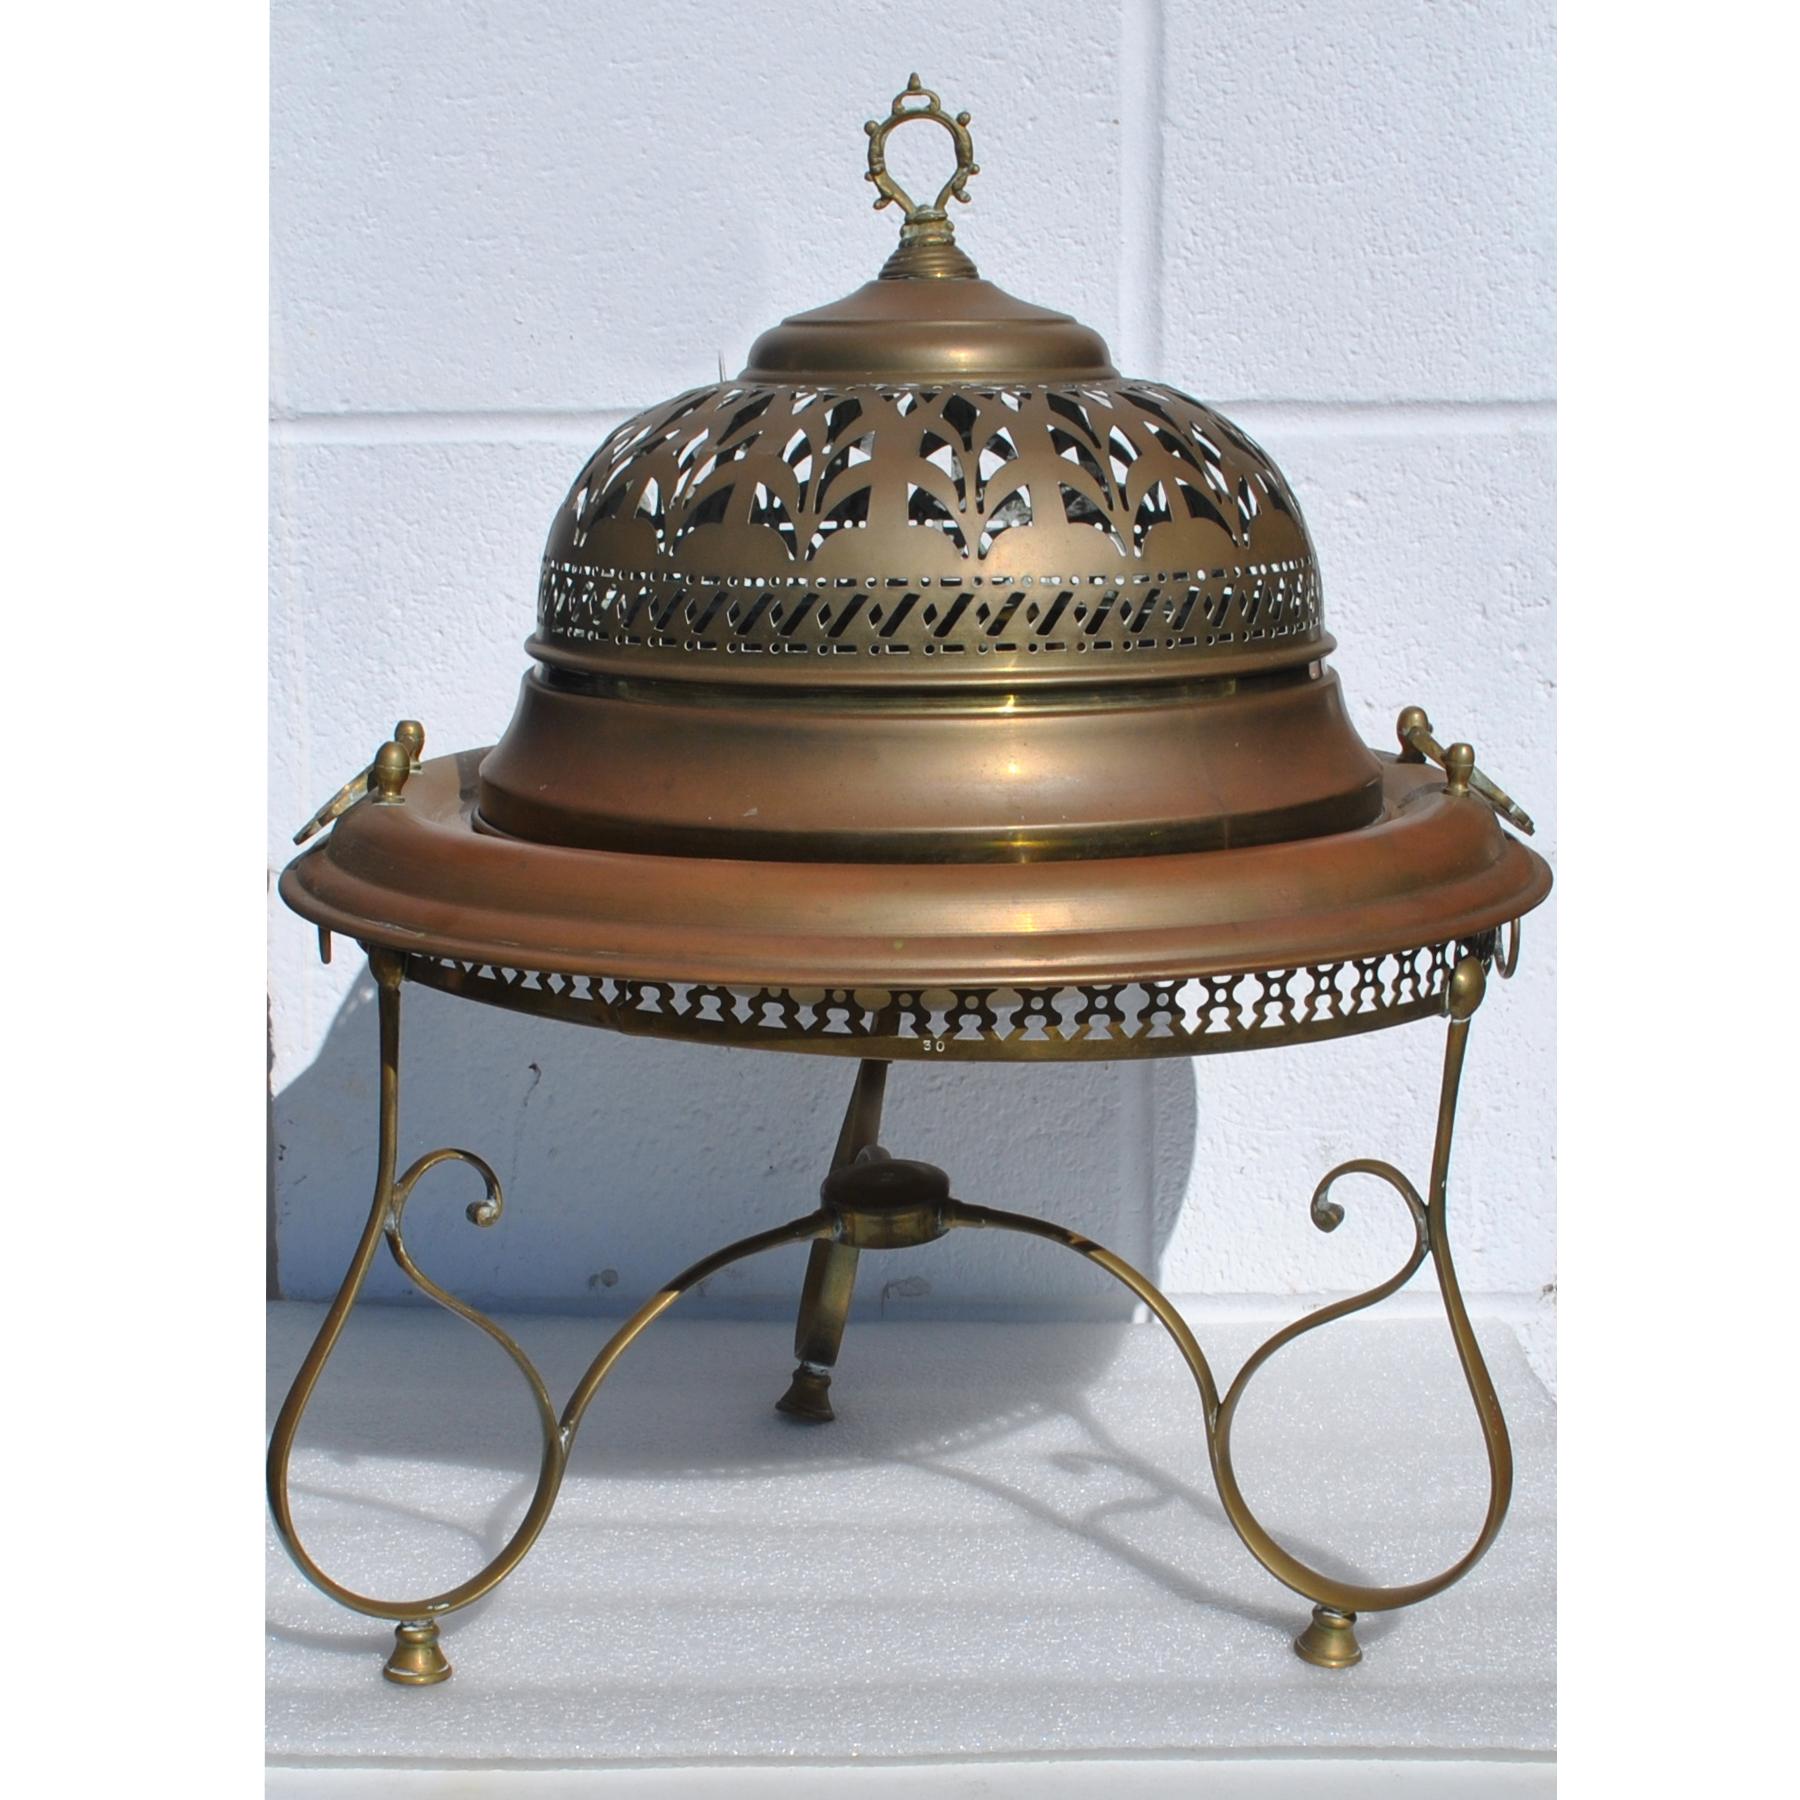 Islamic Vintage Turkish Brass Brazier with Sword Skewers For Sale